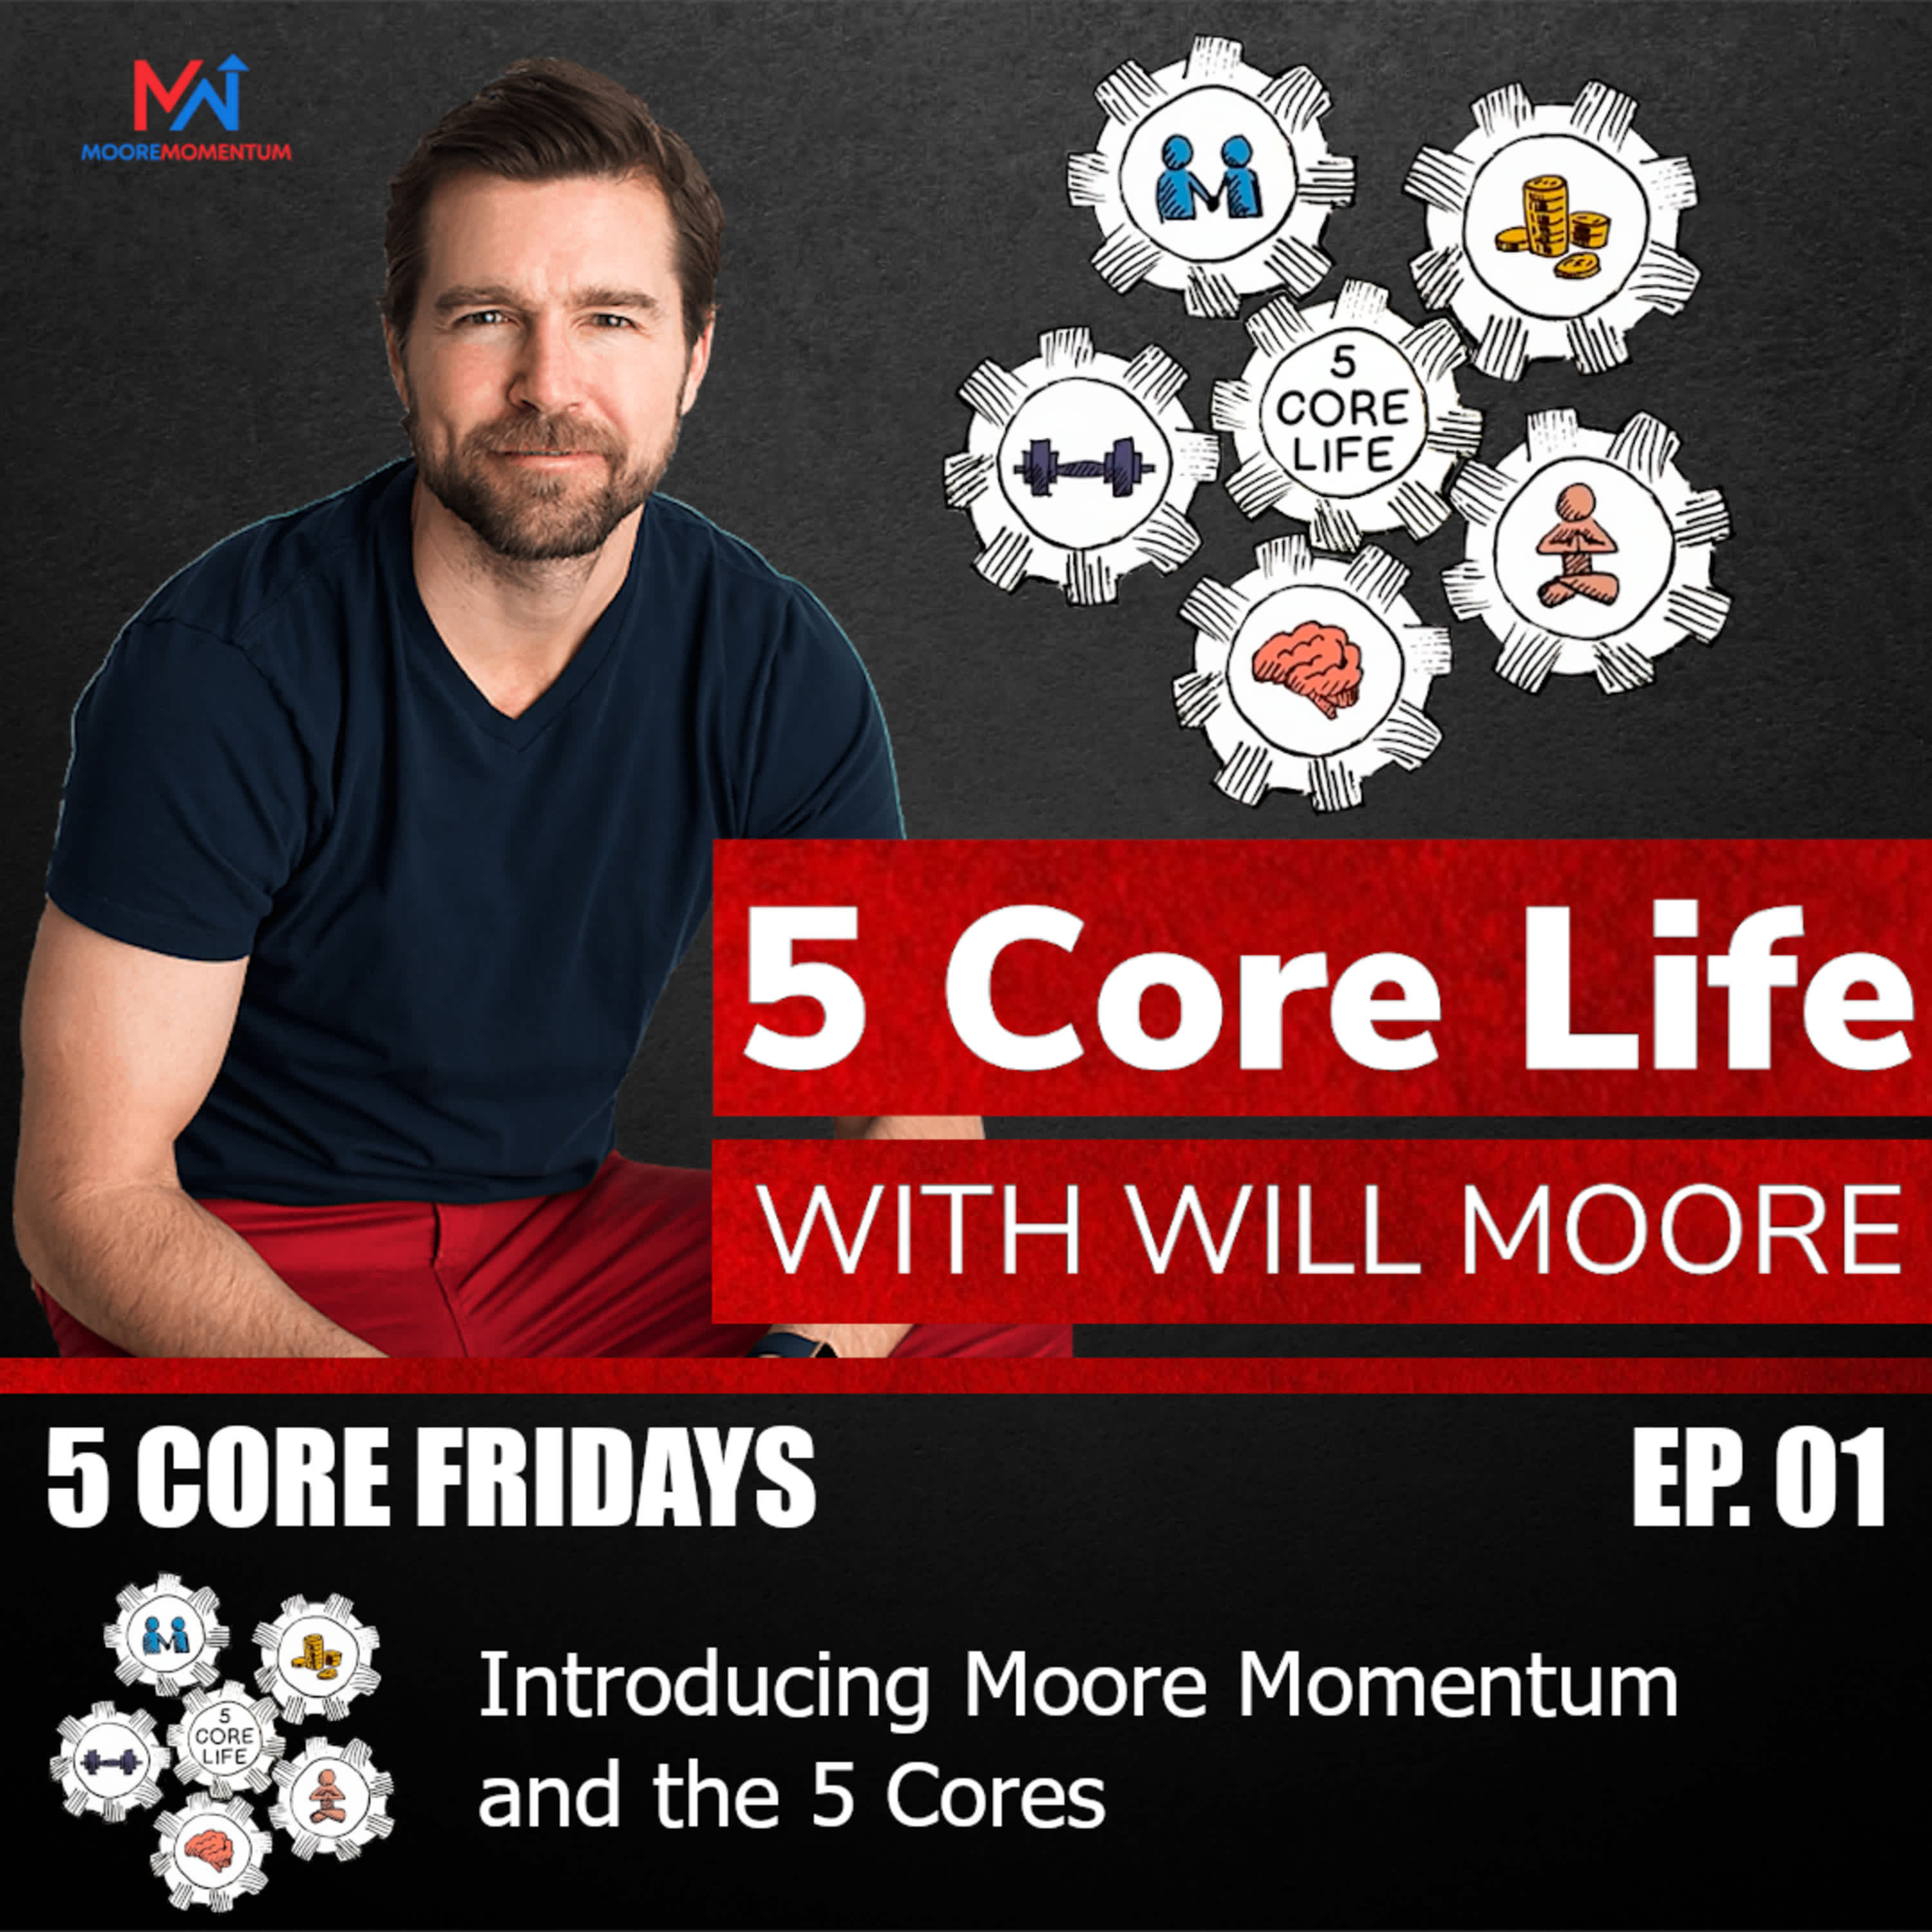 Introducing Moore Momentum and the 5 Cores